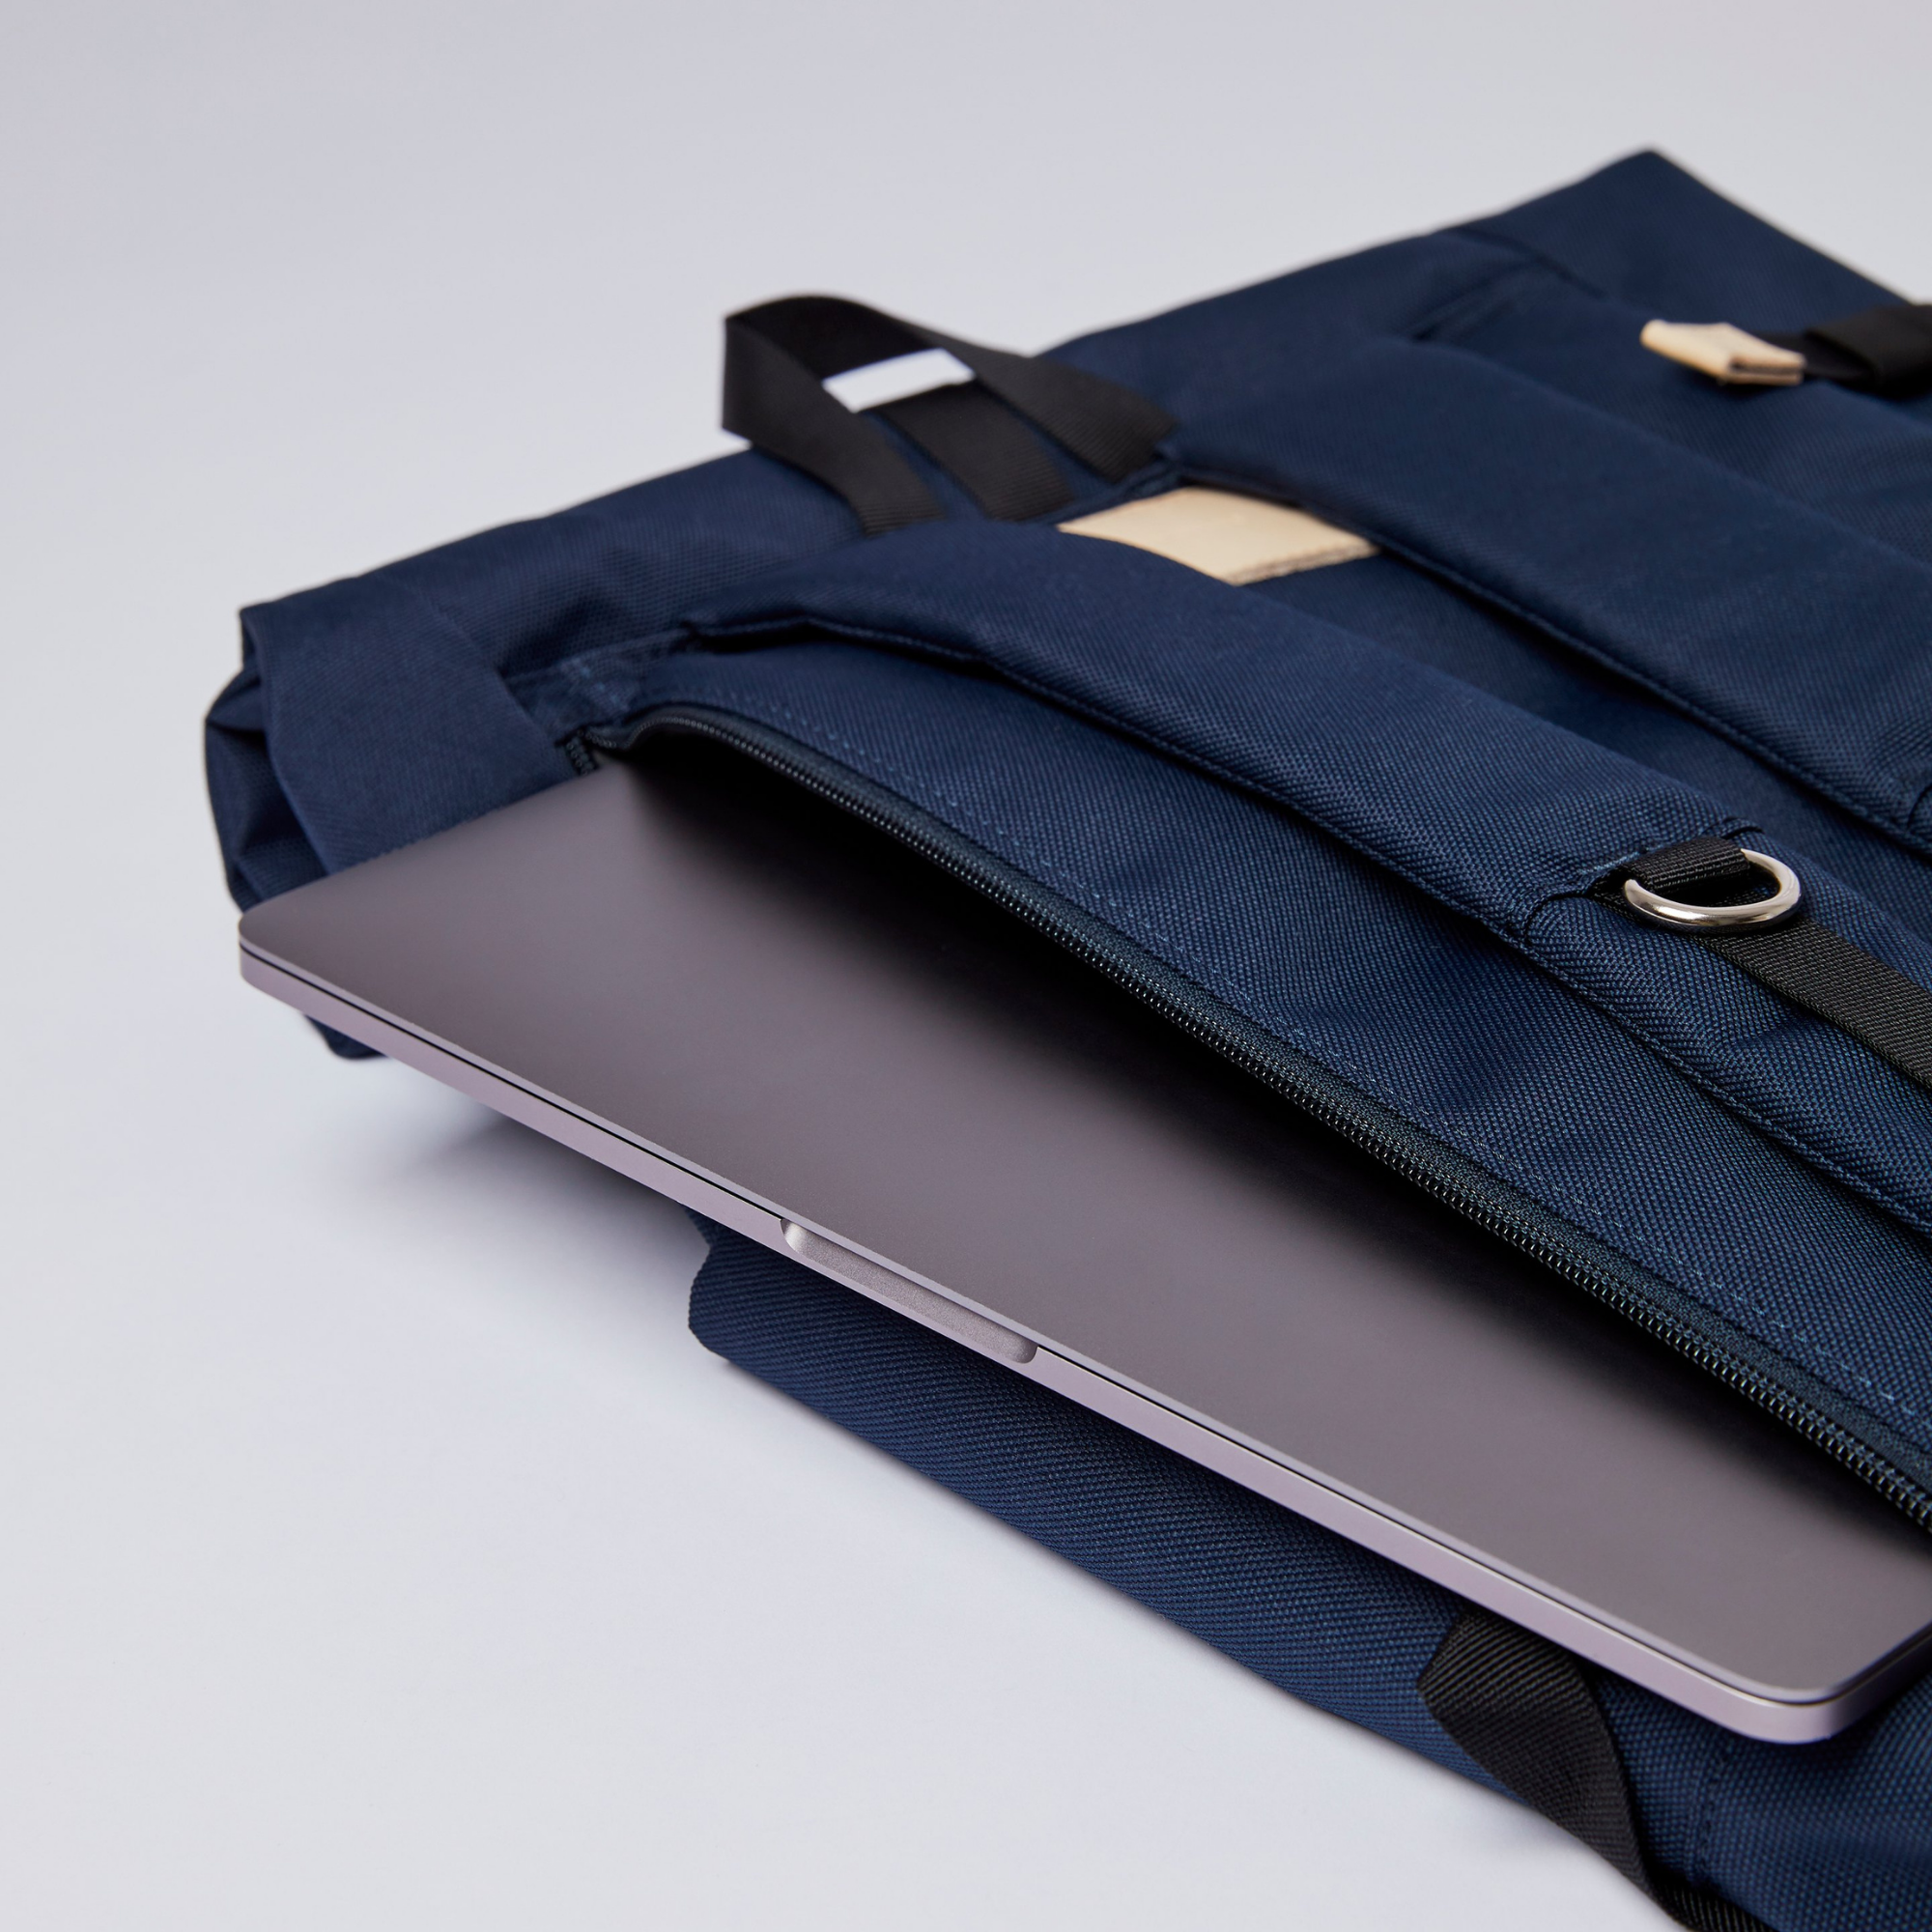 Sandqvist Ilon Backpack in Navy SQA1498| Shop from eightywingold an official brand partner for Sandqvist Canada and US. 